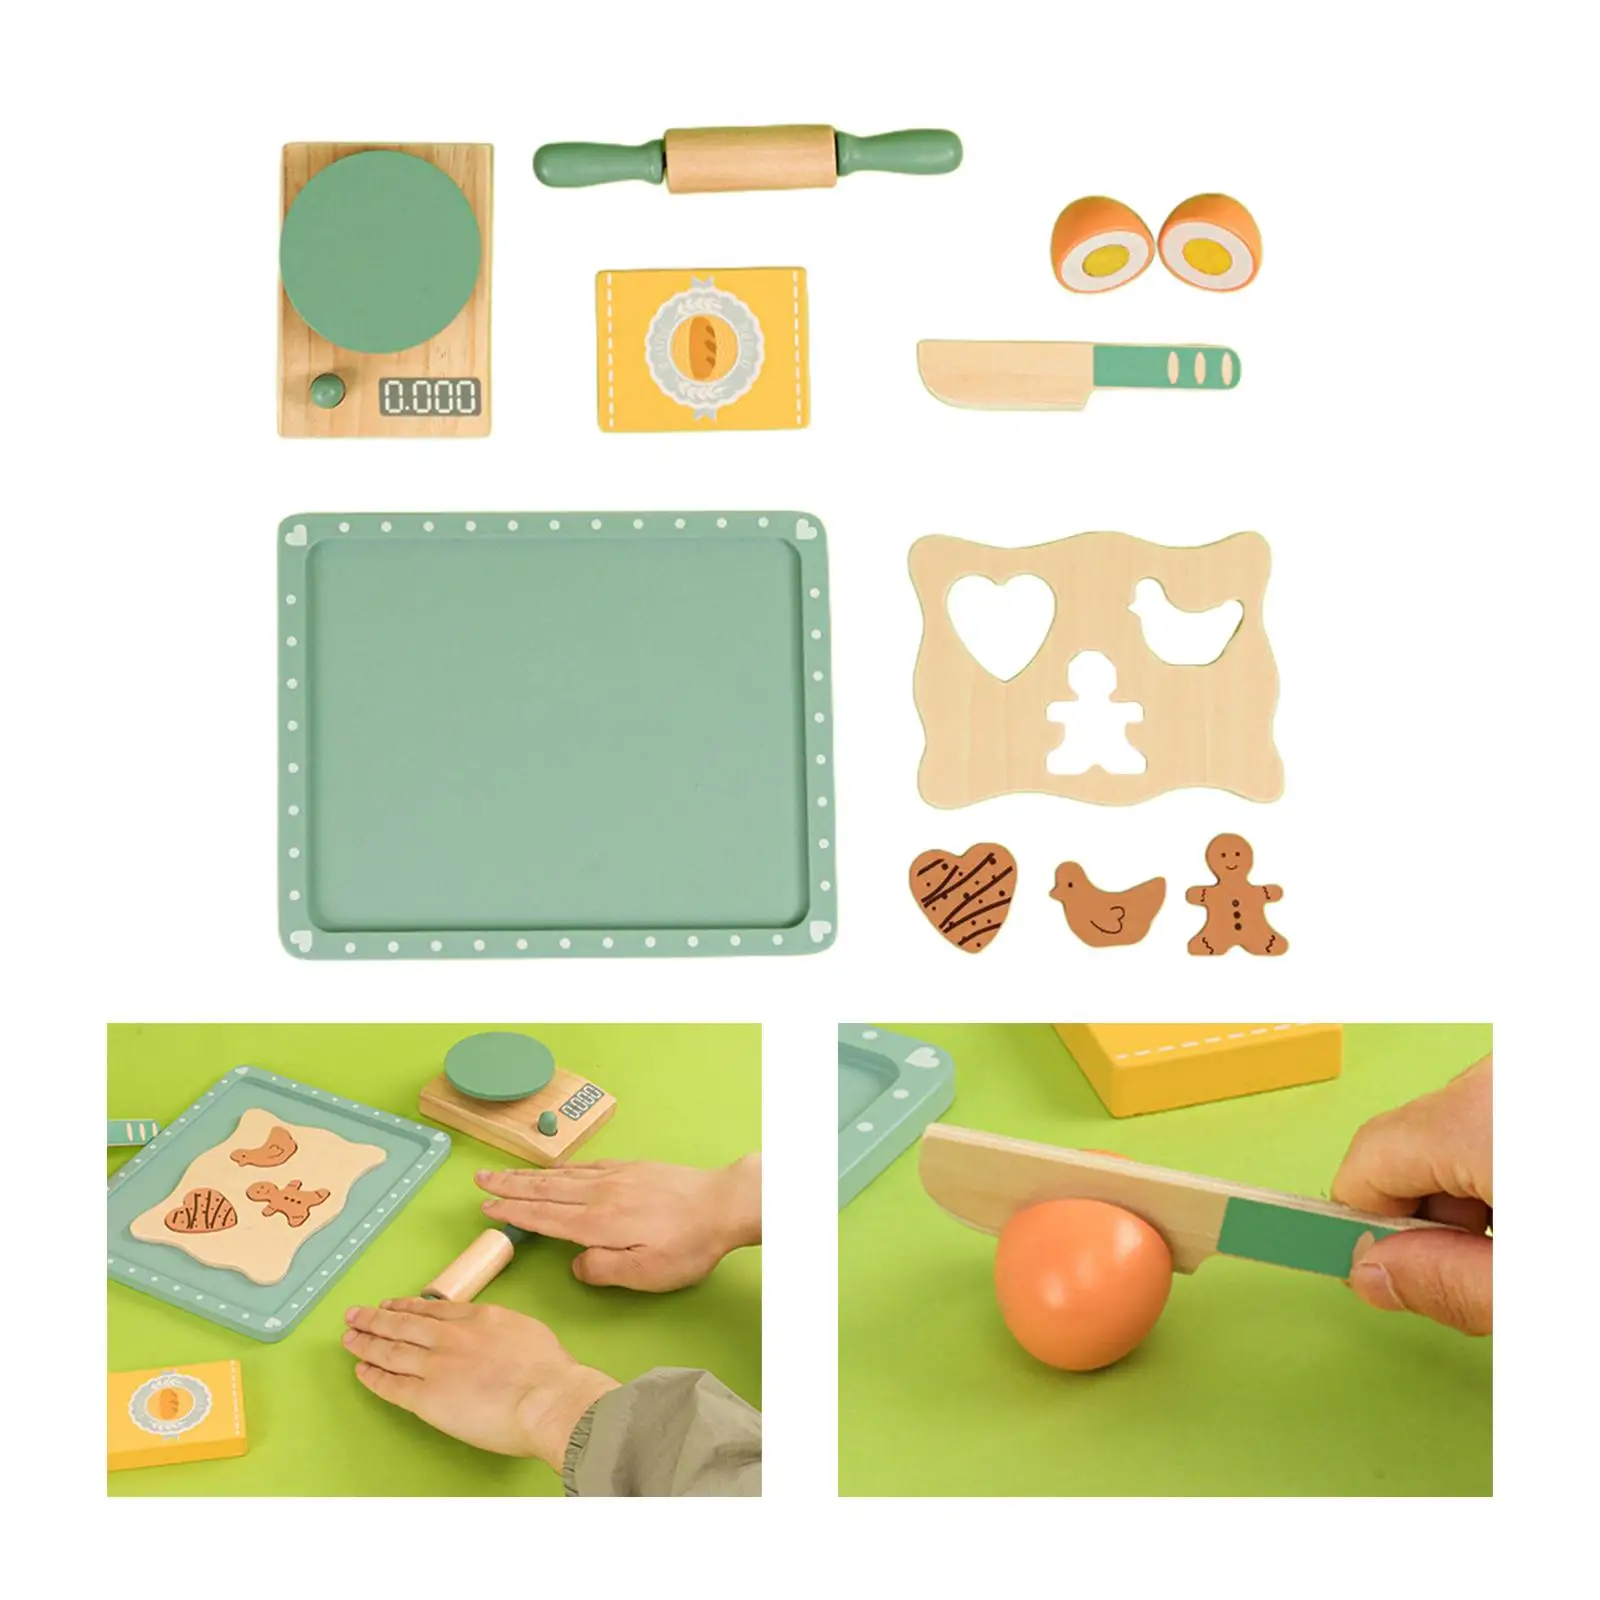 10 Pieces Wood Toy Baking Set Wooden Toy Early Educational Kitchen Cooking and Baking Set for Party Toy Birthday Gift Children